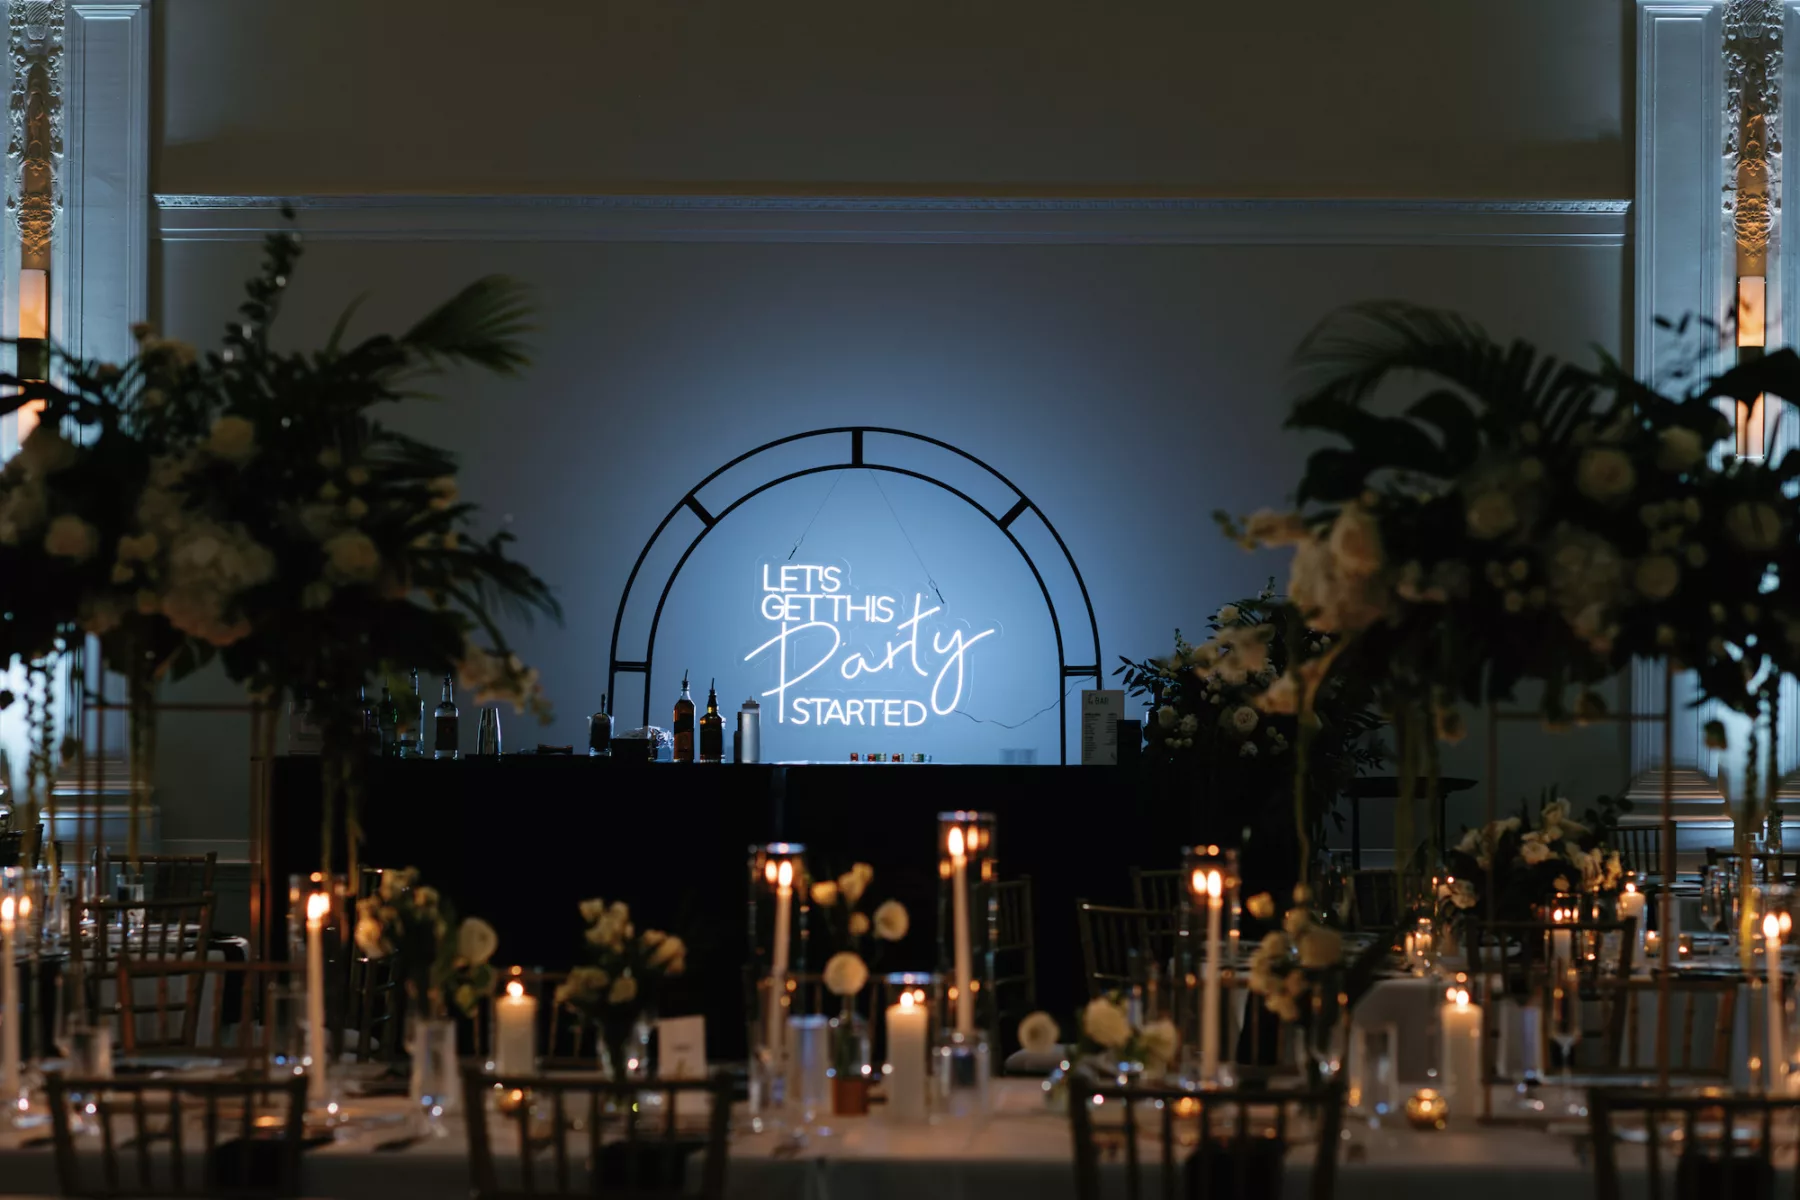 Let's Get This Party Started Neon Wedding Reception Bar Sign Backdrop Ideas | St Pete Planner Coastal Coordinating